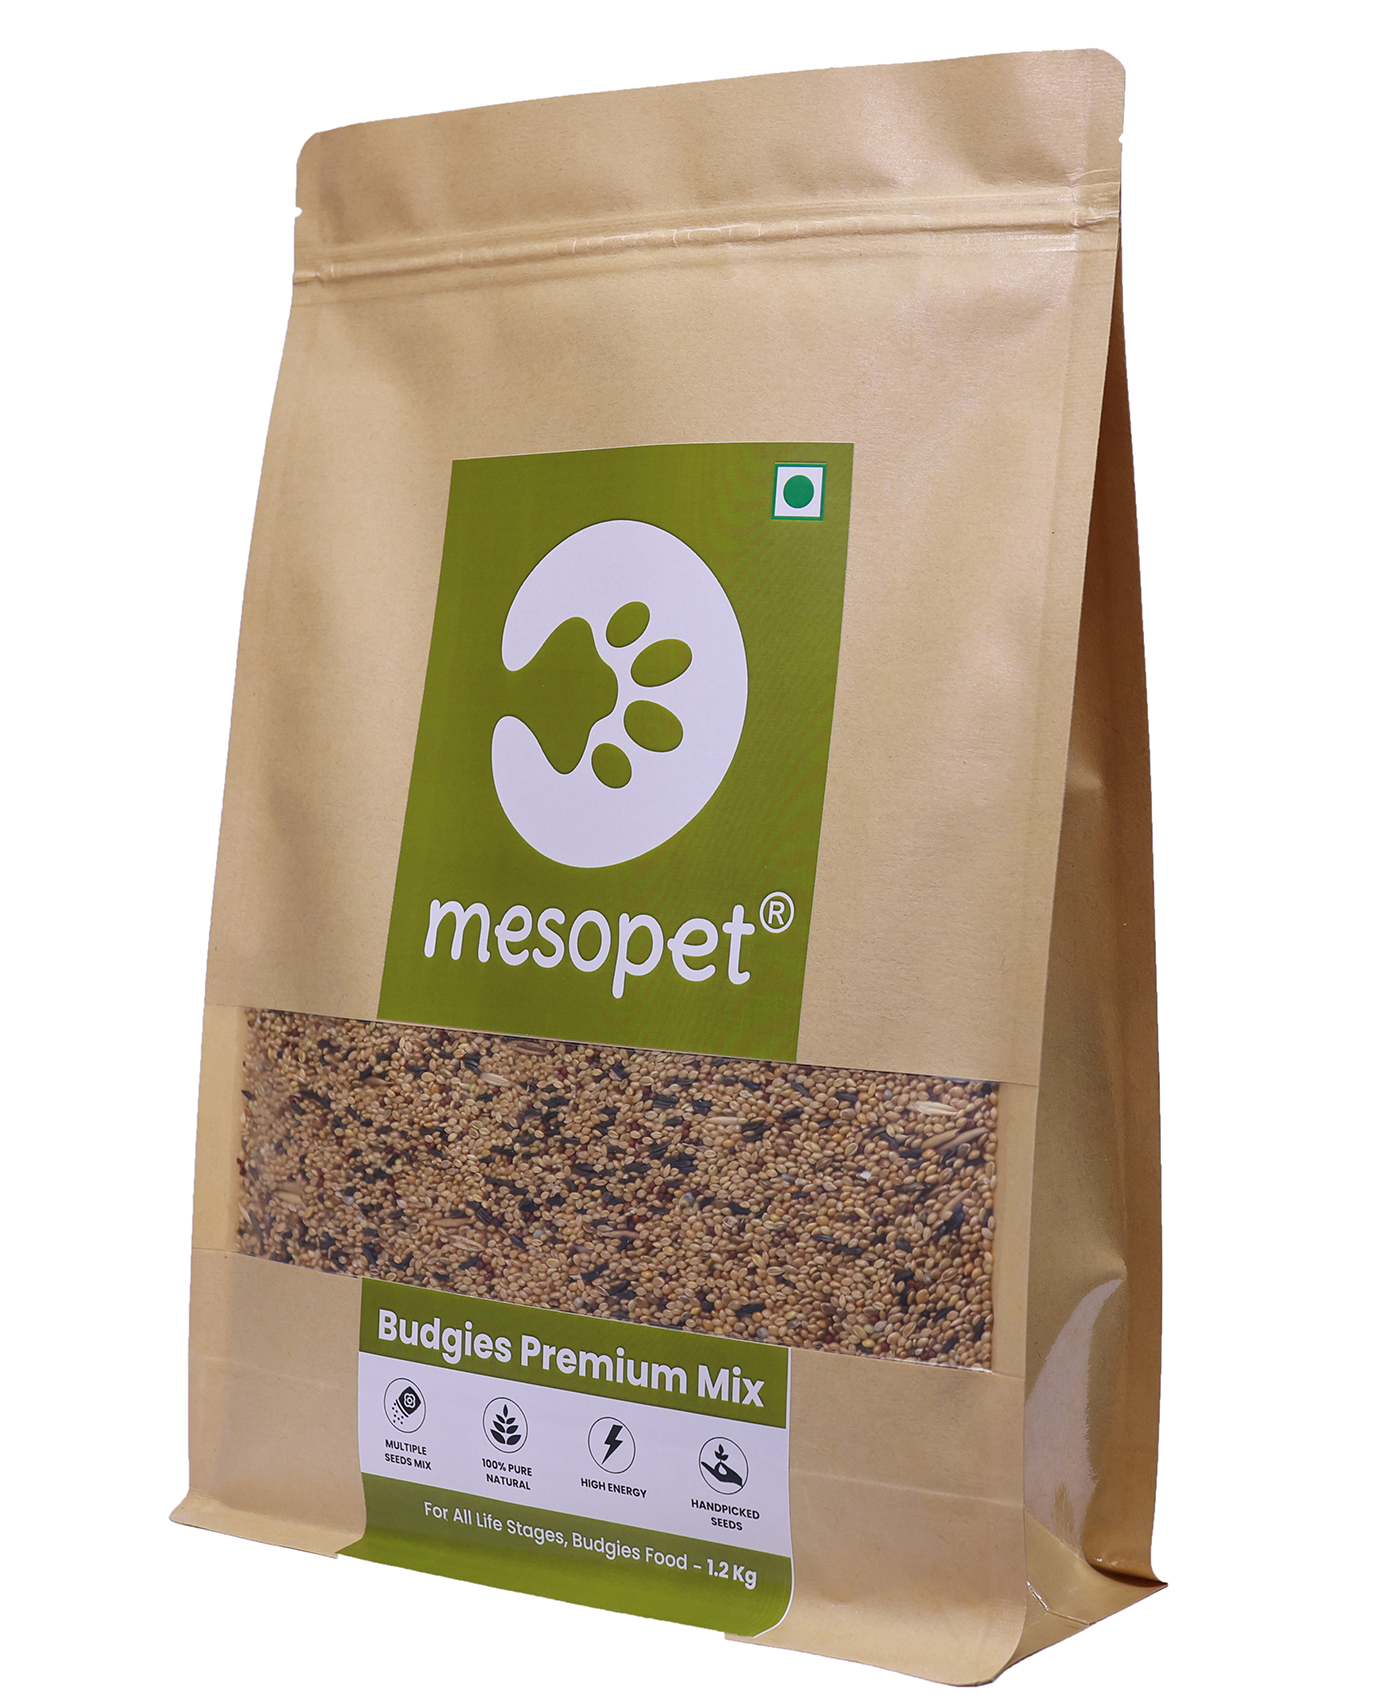 MESOPET Budgies Premium Mix Seed Blend of 9 Grains & Nuts, Bird Food for All Life Stages Budgies